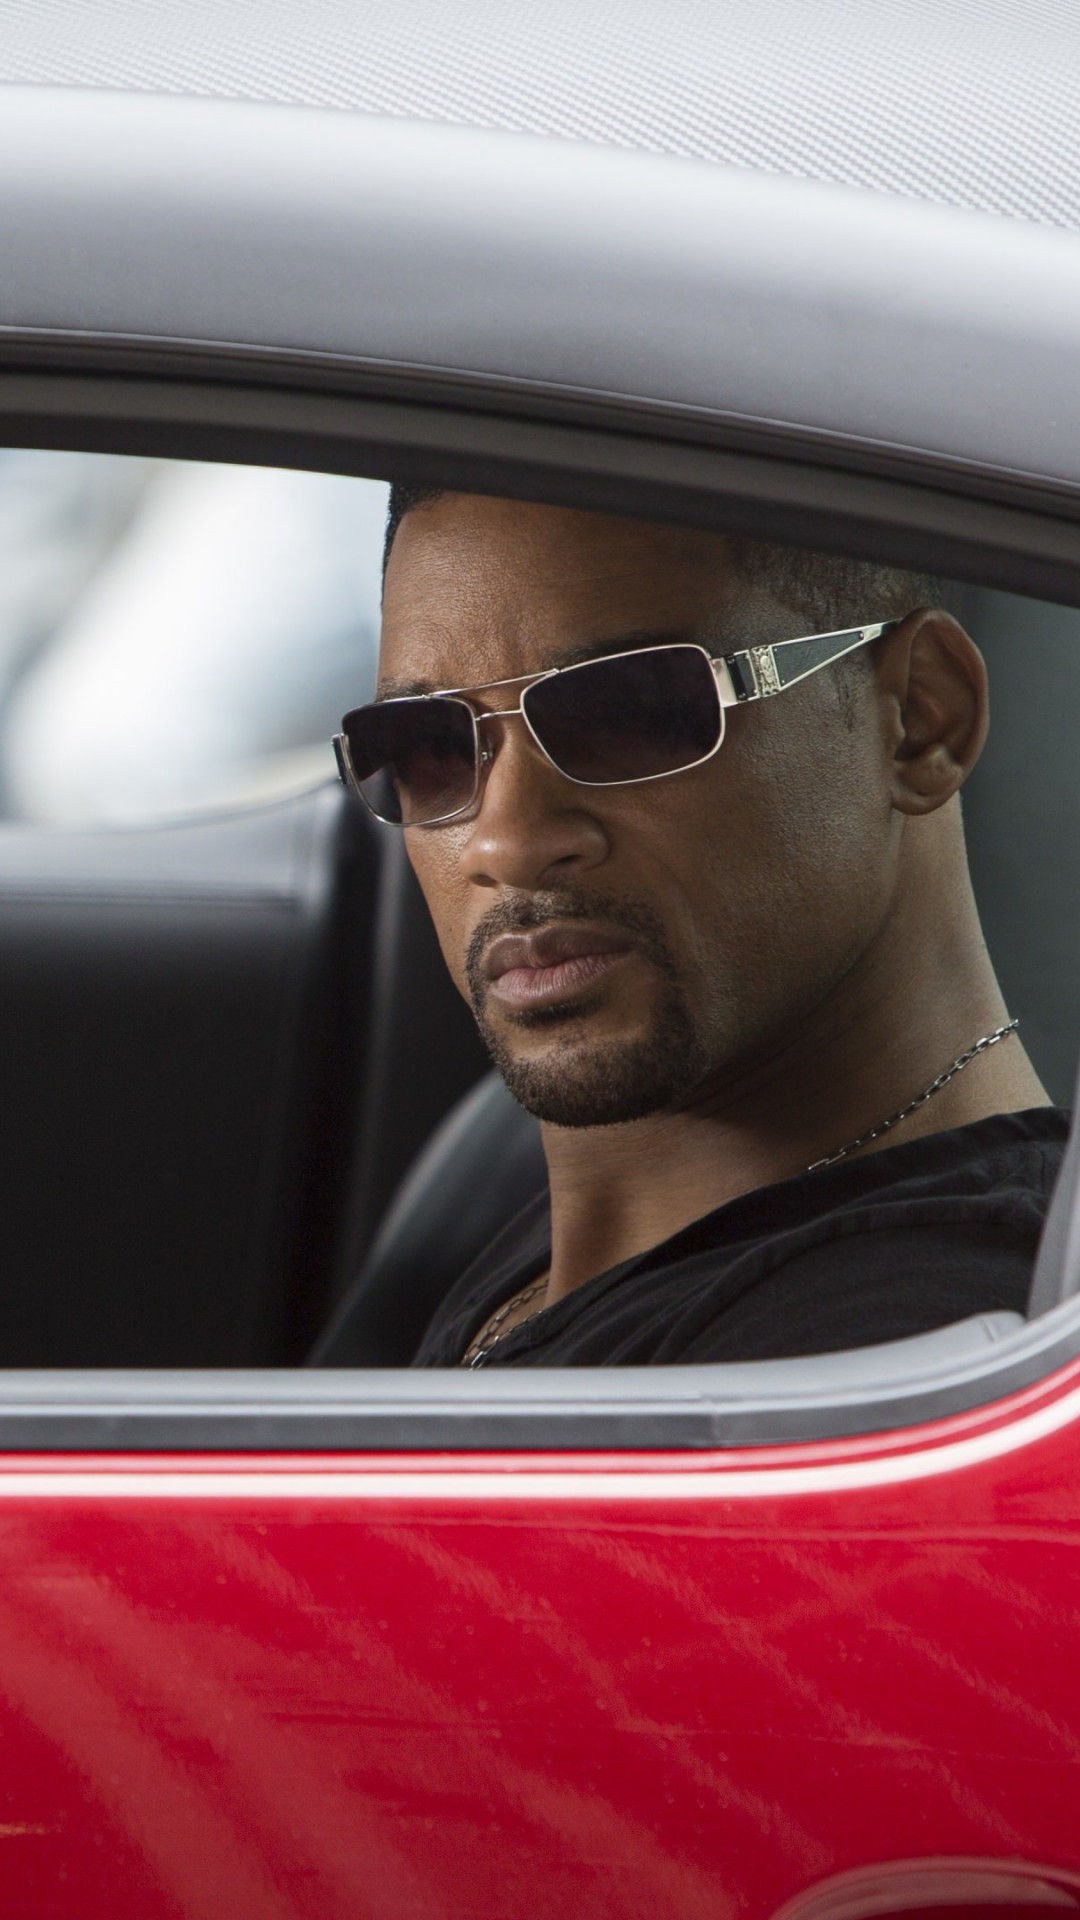 Will Smith at the shooting of "Focus" Wallpaper for HTC One